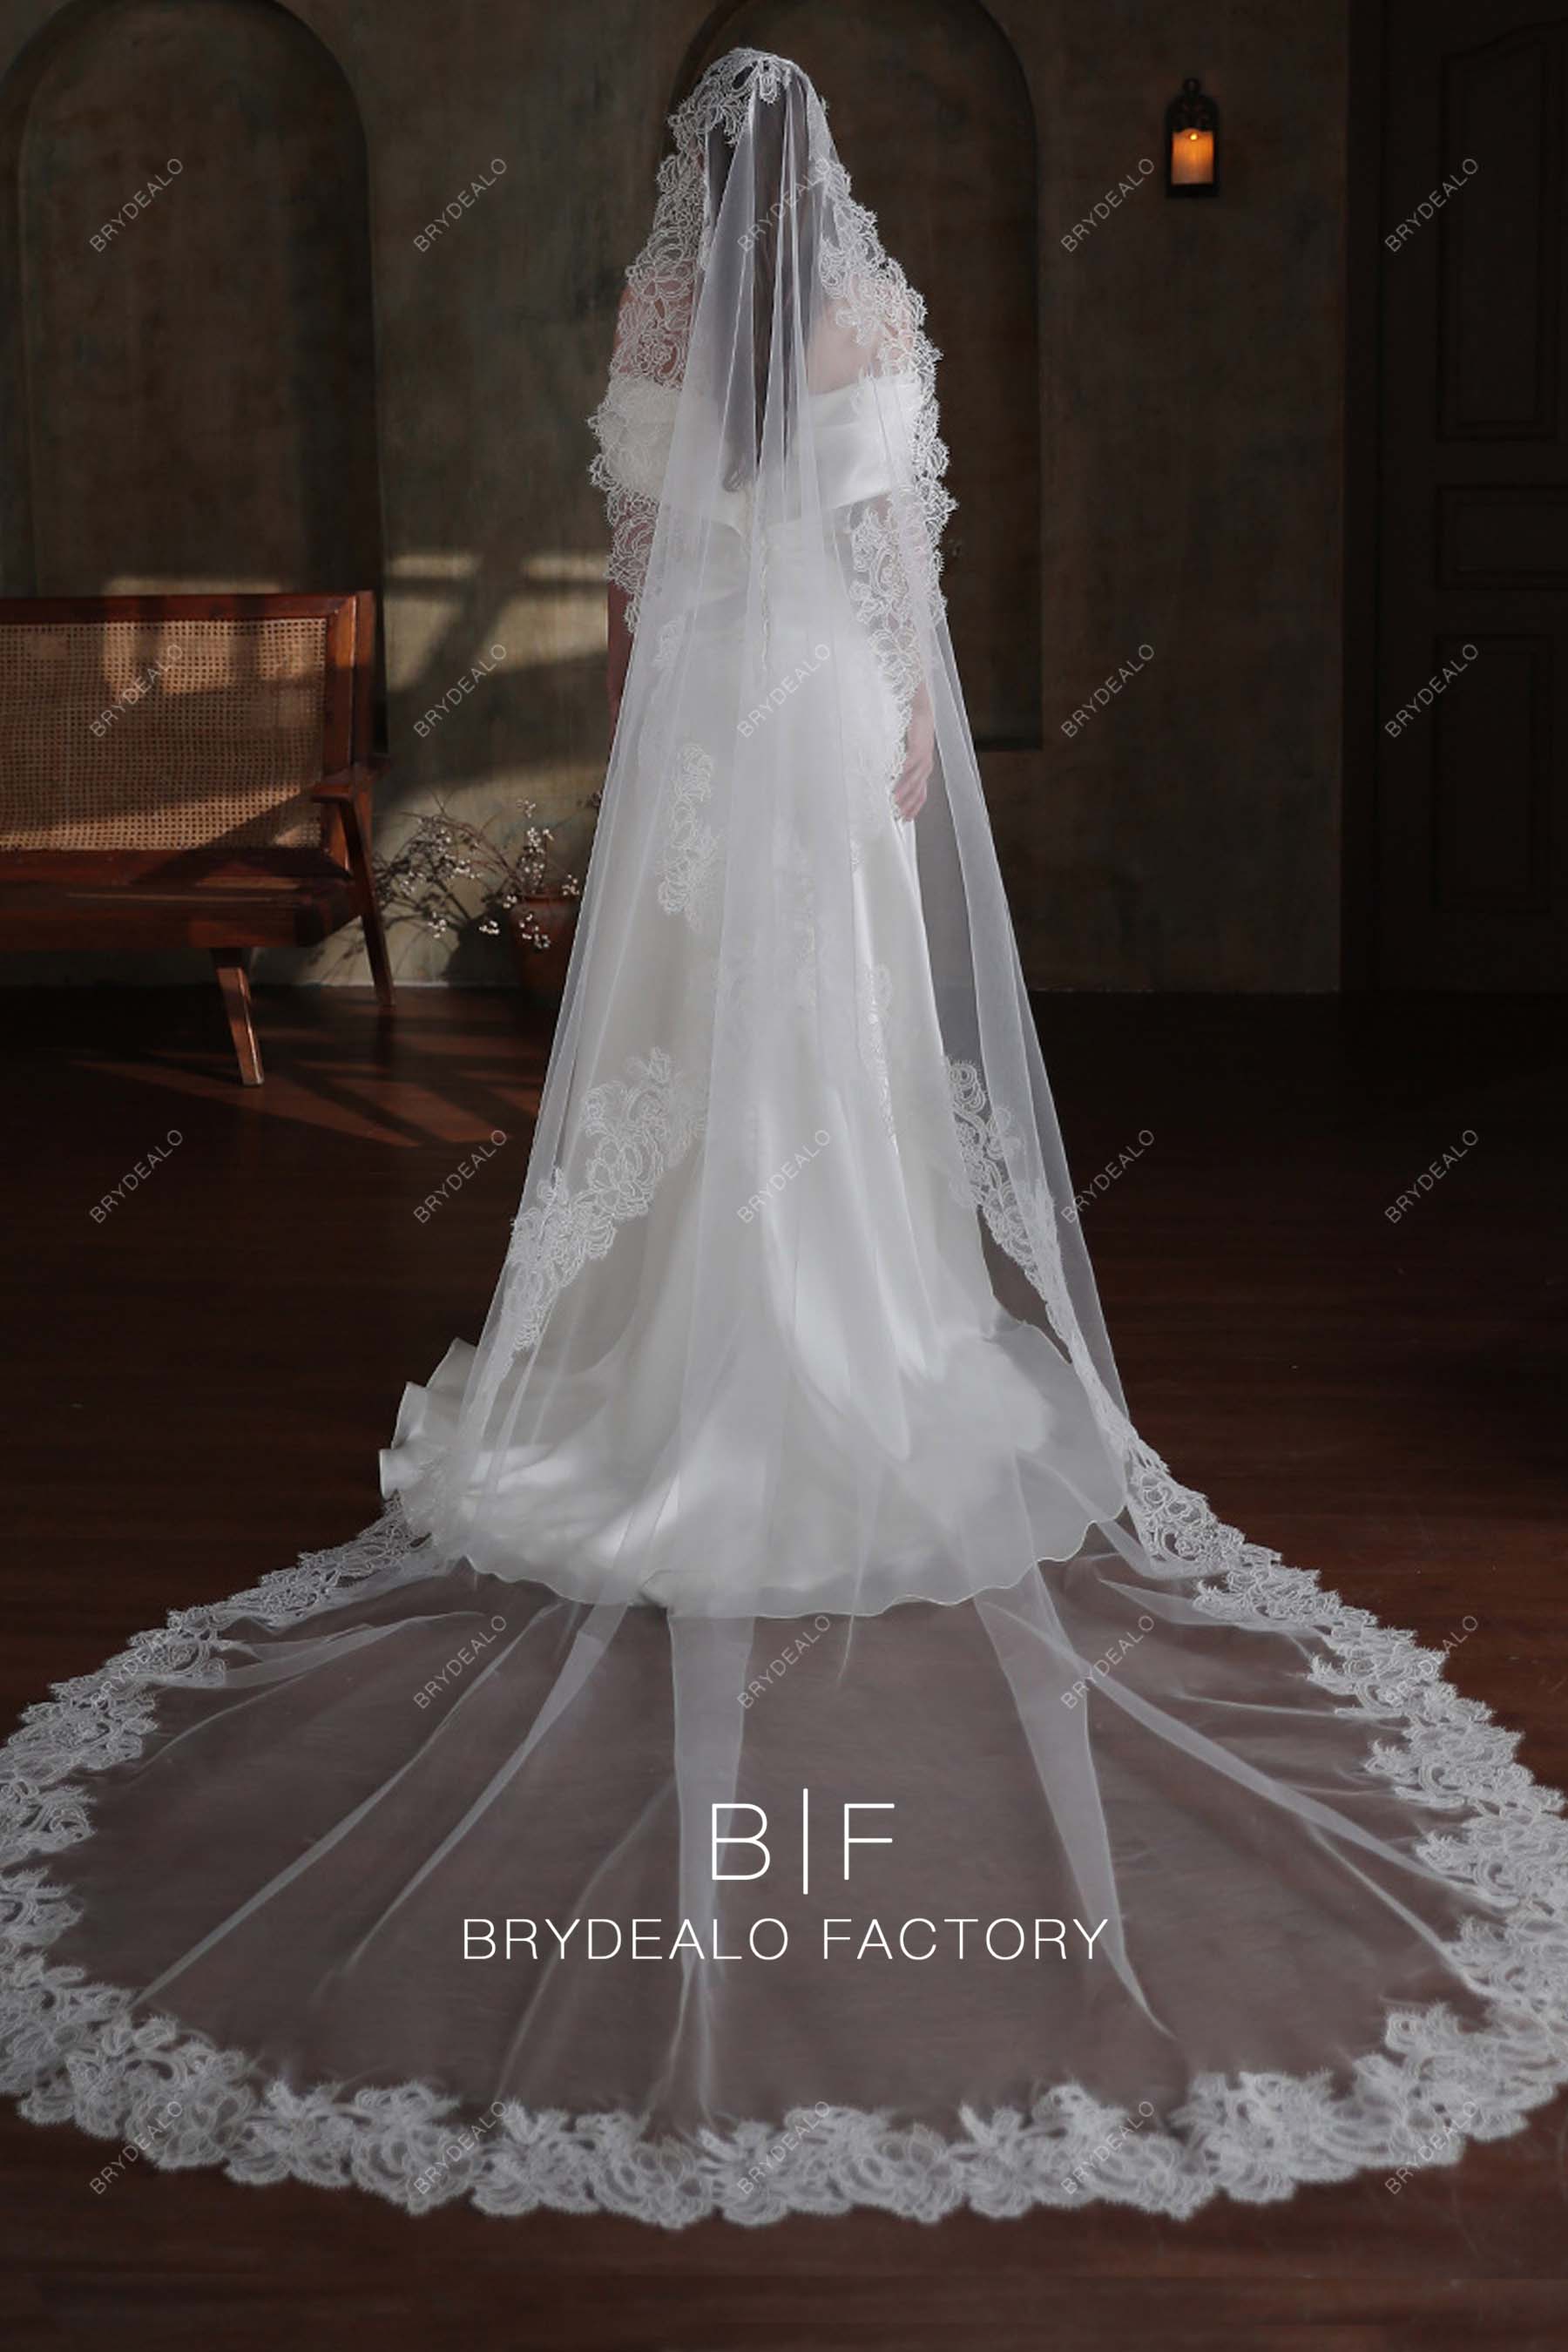 DongXiao Luxury Wedding Veils / Ivory Lace Veil /Sequins Lace Applique Cathedral Veils, Long Bridal Veil, White Vail &vomb